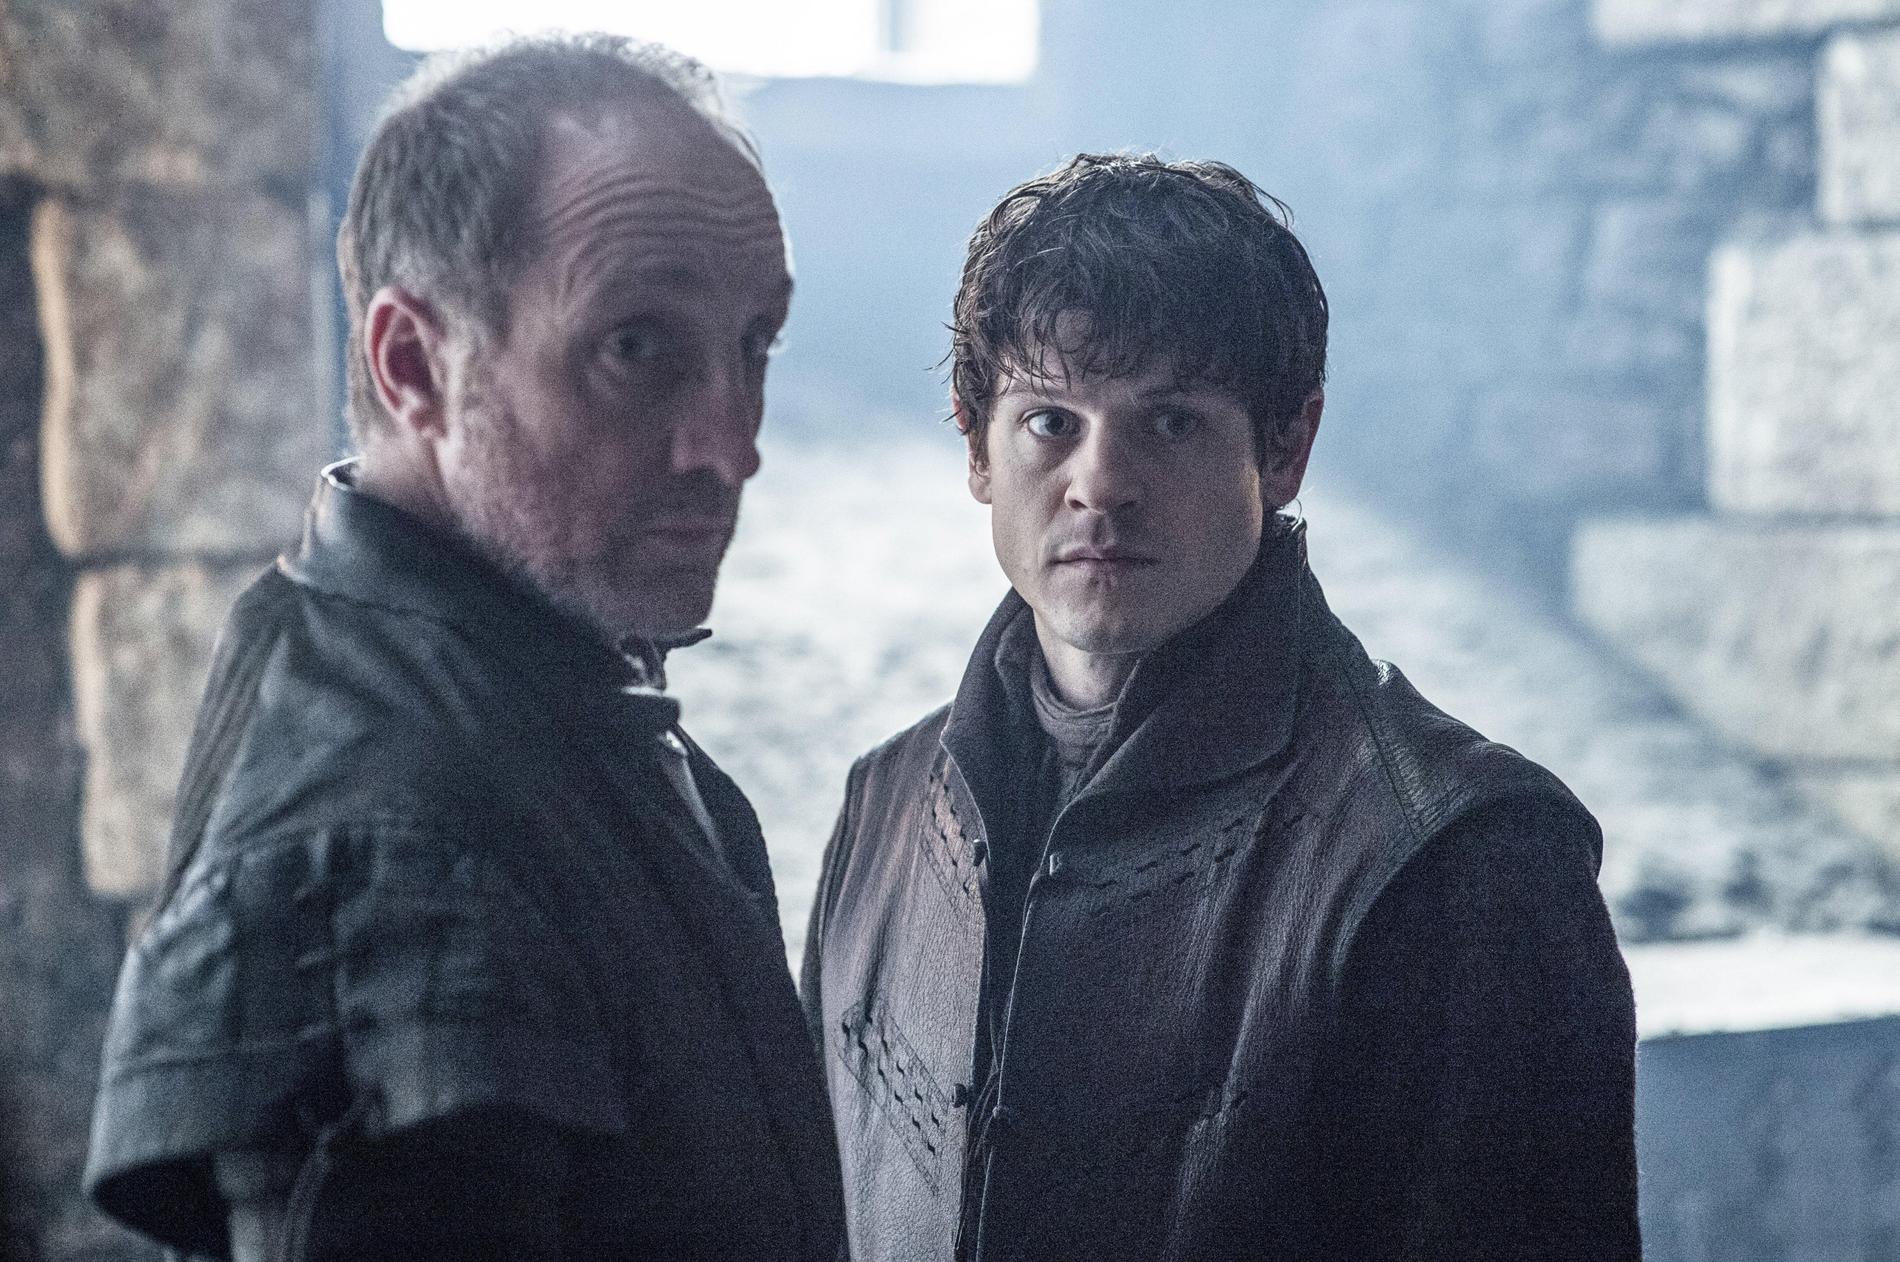 Ramsay Bolton med pappa Roose.